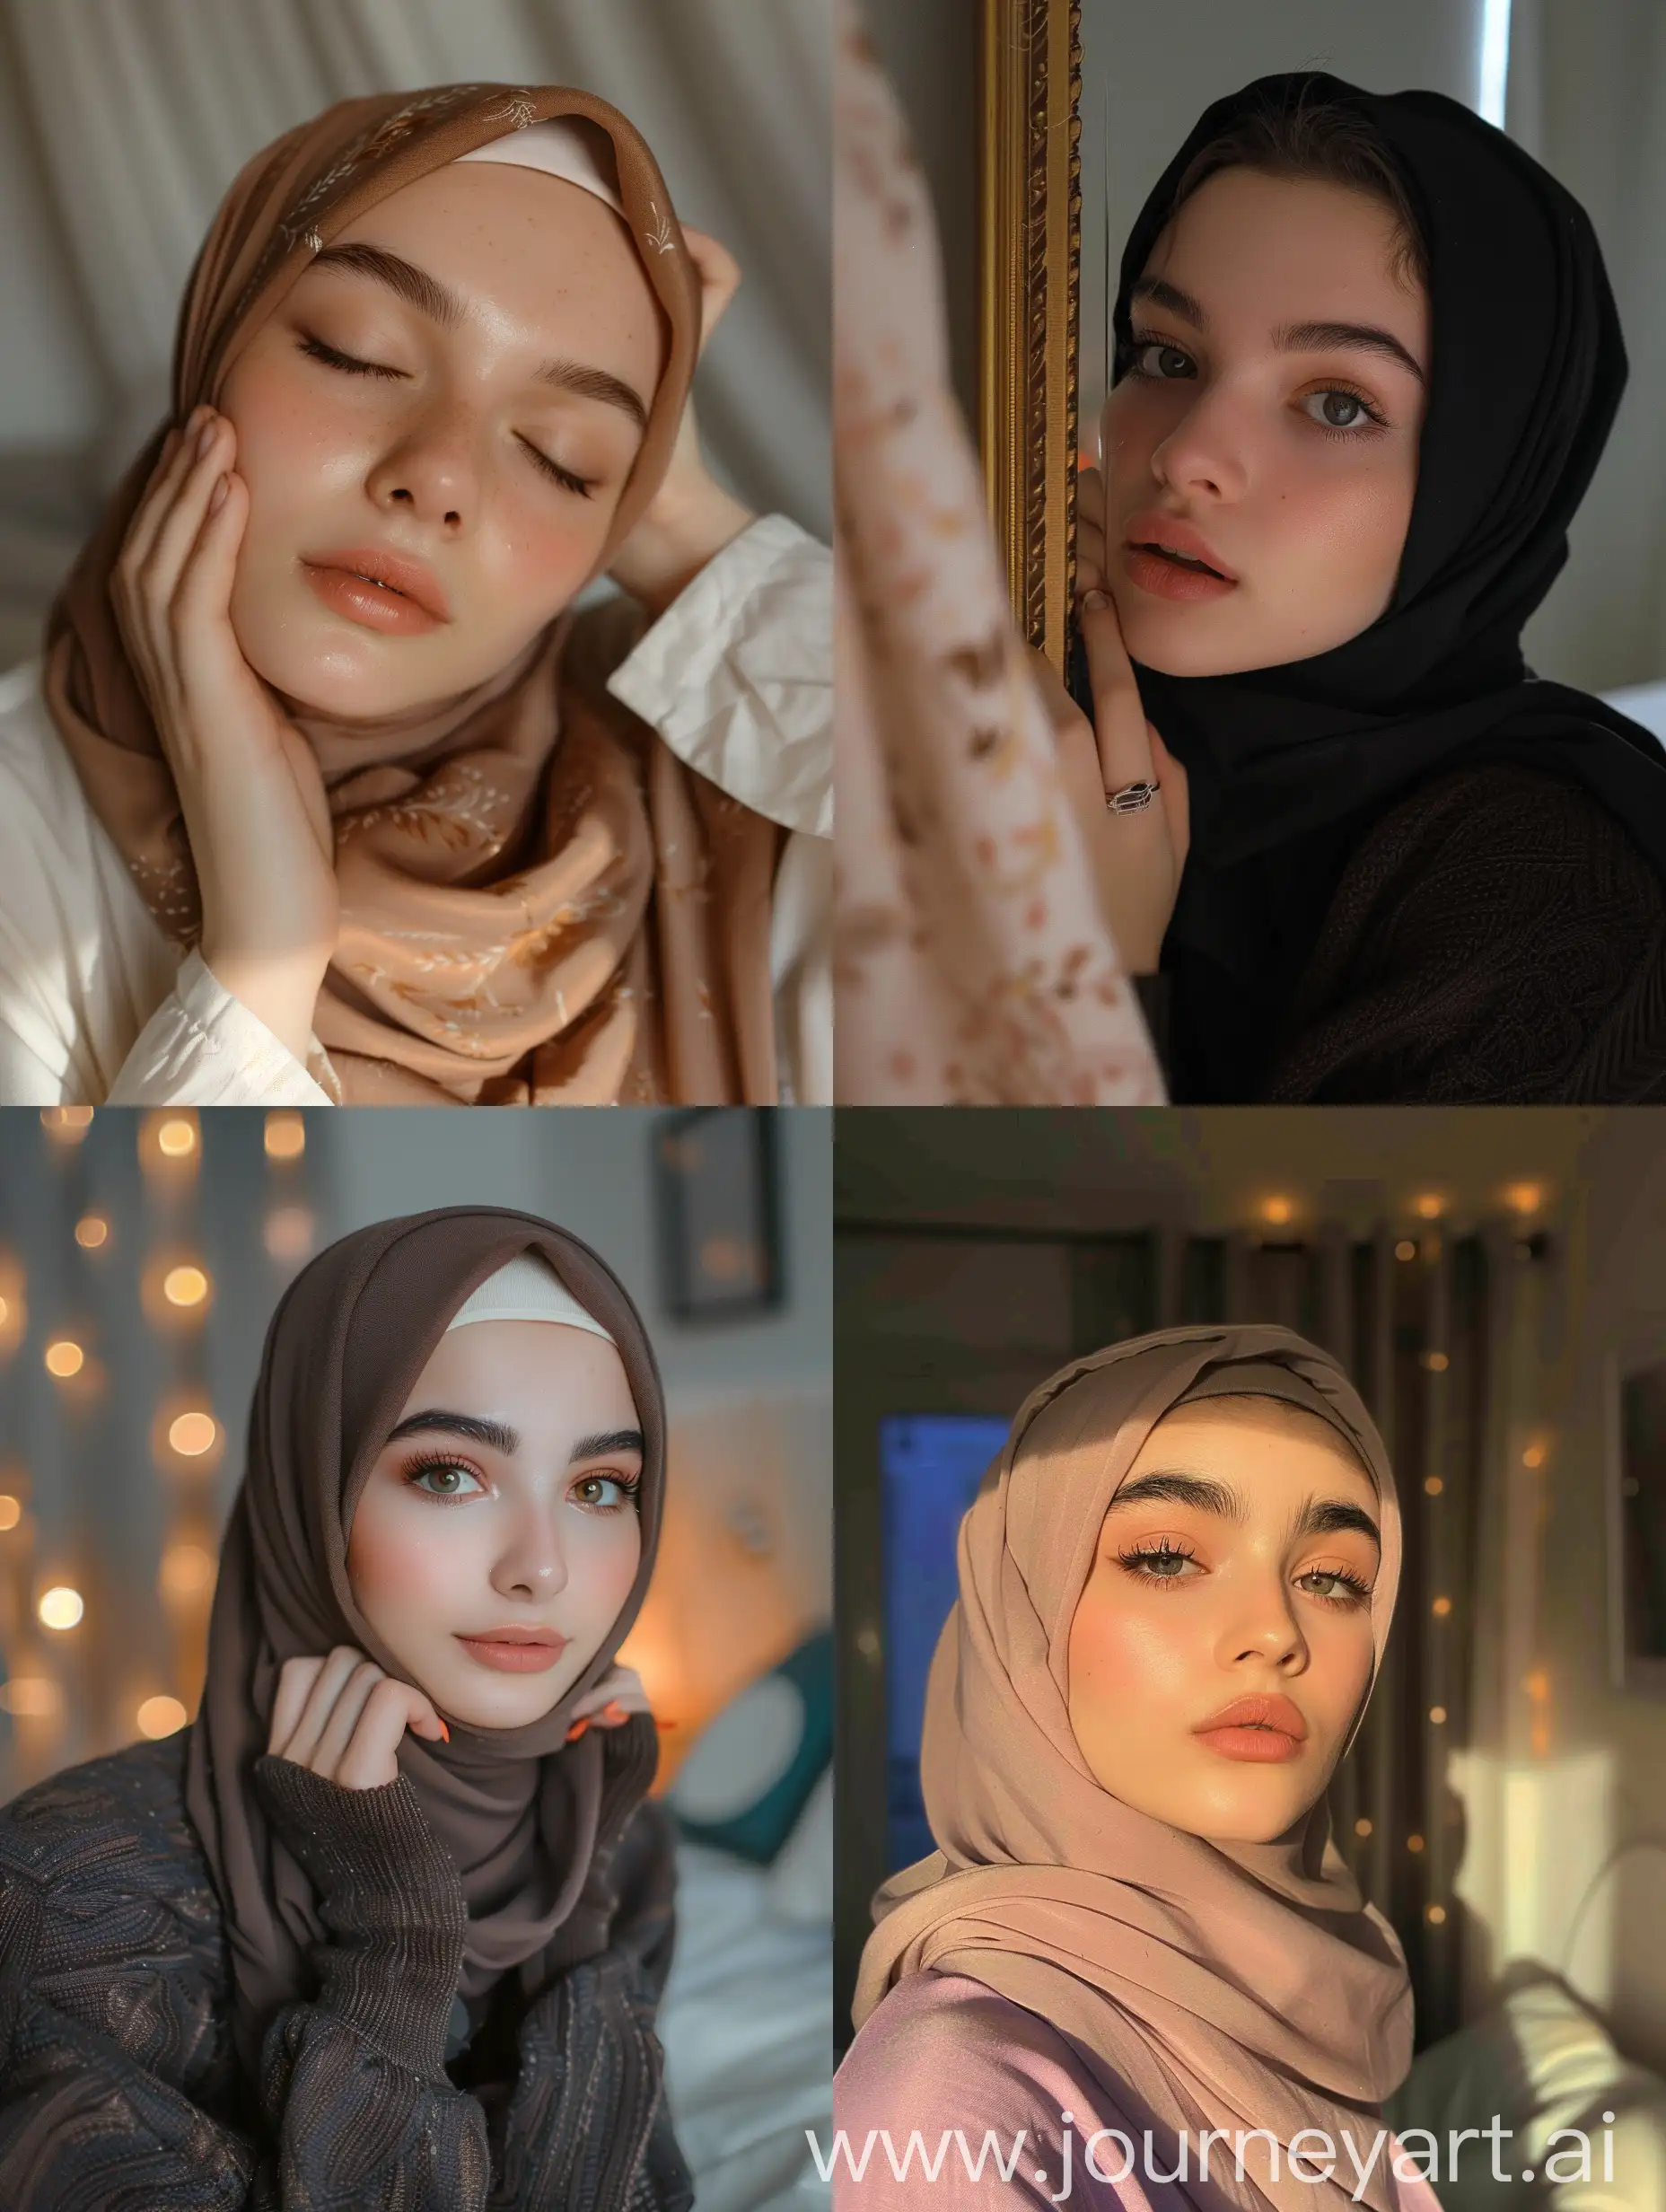 A teenage girl hijab Muslim influencer in her bedroom getting ready for bed, 17 years old, adorable, chiseled cheekbones, jawline, bushy eyebrows